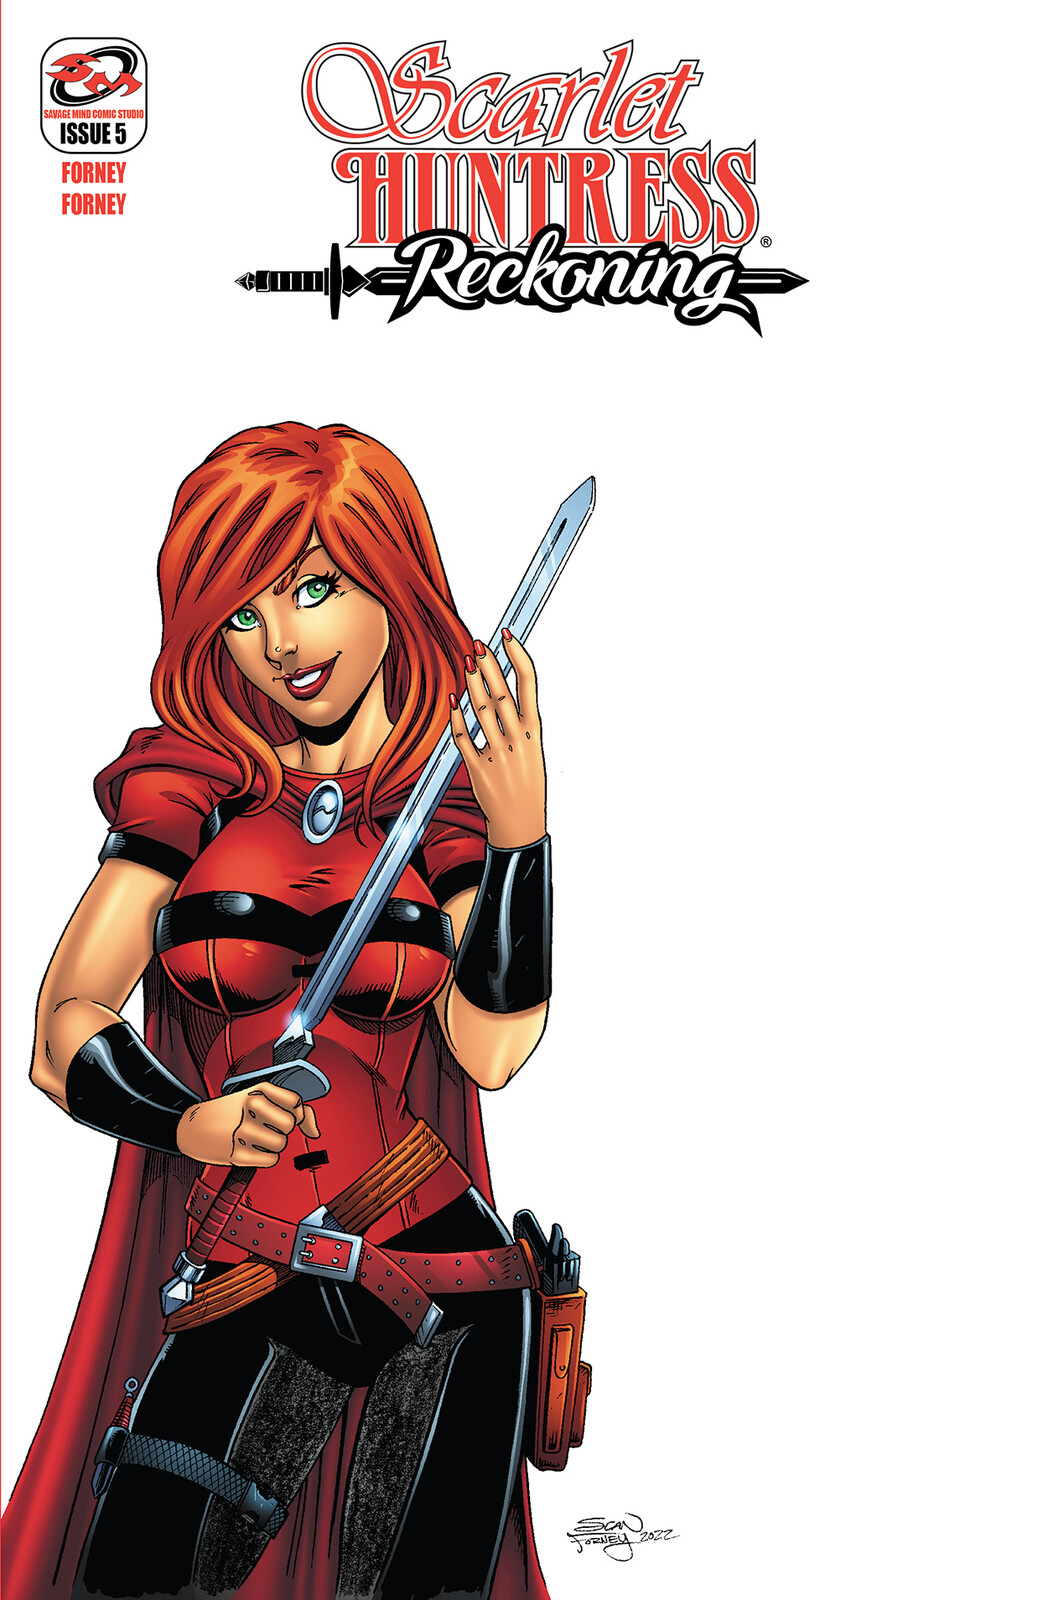 Scarlet Huntress: Reckoning sketch-up cover.

Pencils, inks, and colors by Sean Forney

Scarlet Huntress copyright and registered trademark Stephanie and Sean Forney